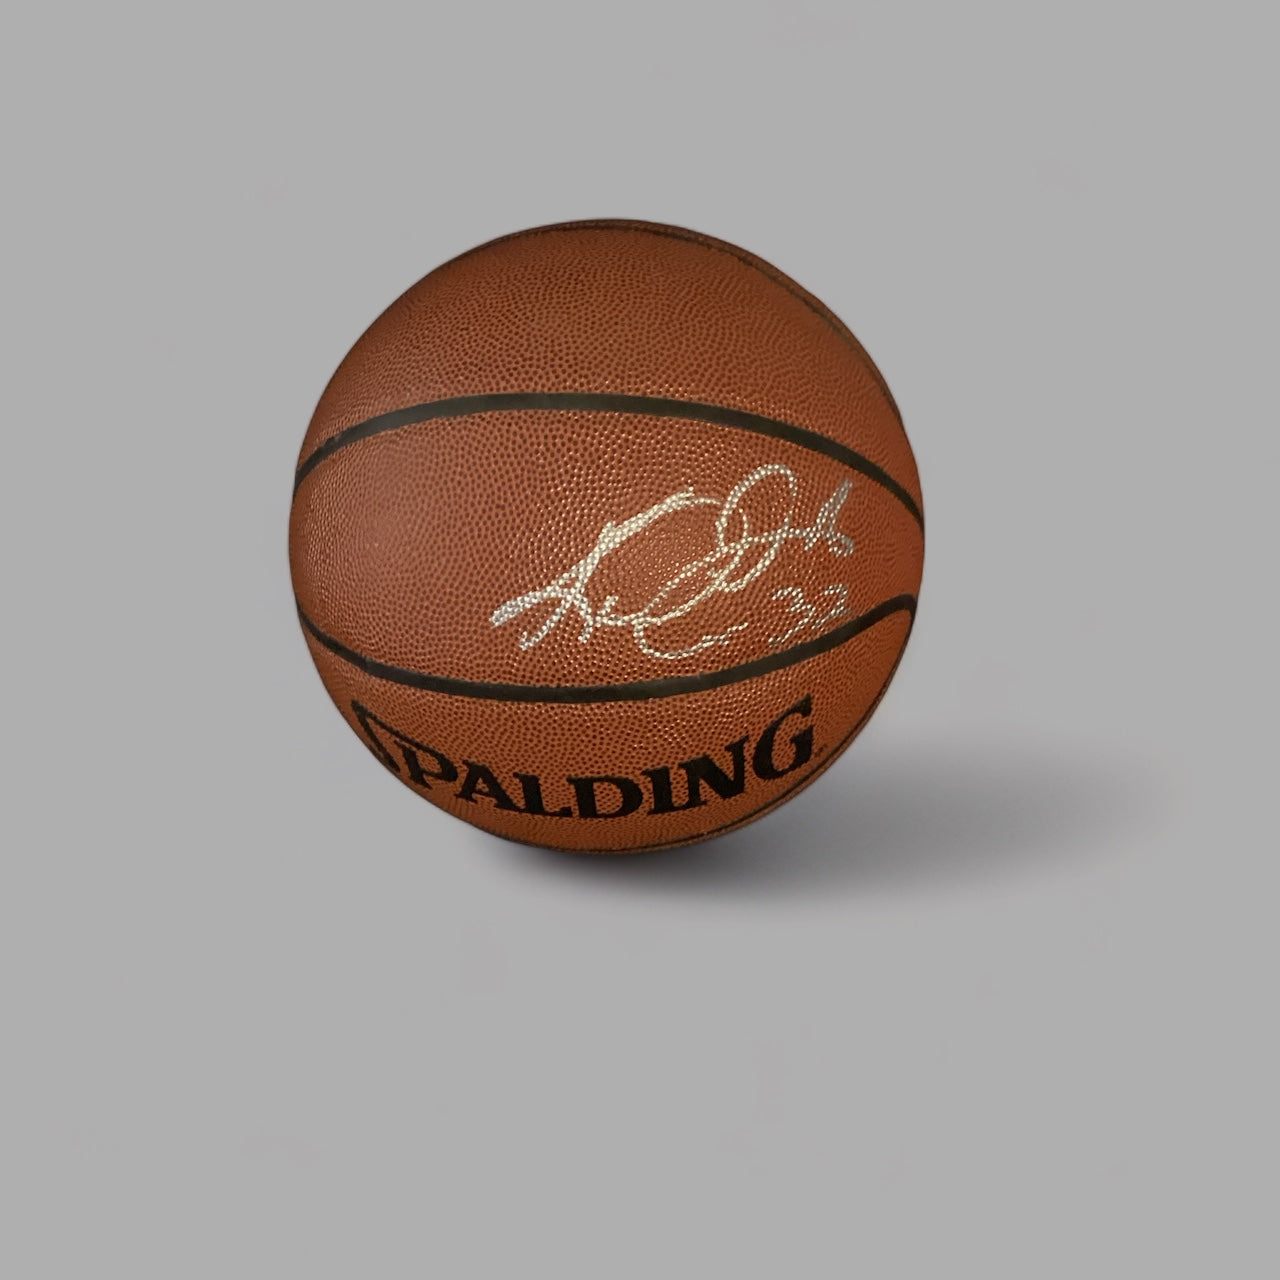 Karl Malone Autographed Signed basketball Elite Promotions & Graphz Authentication